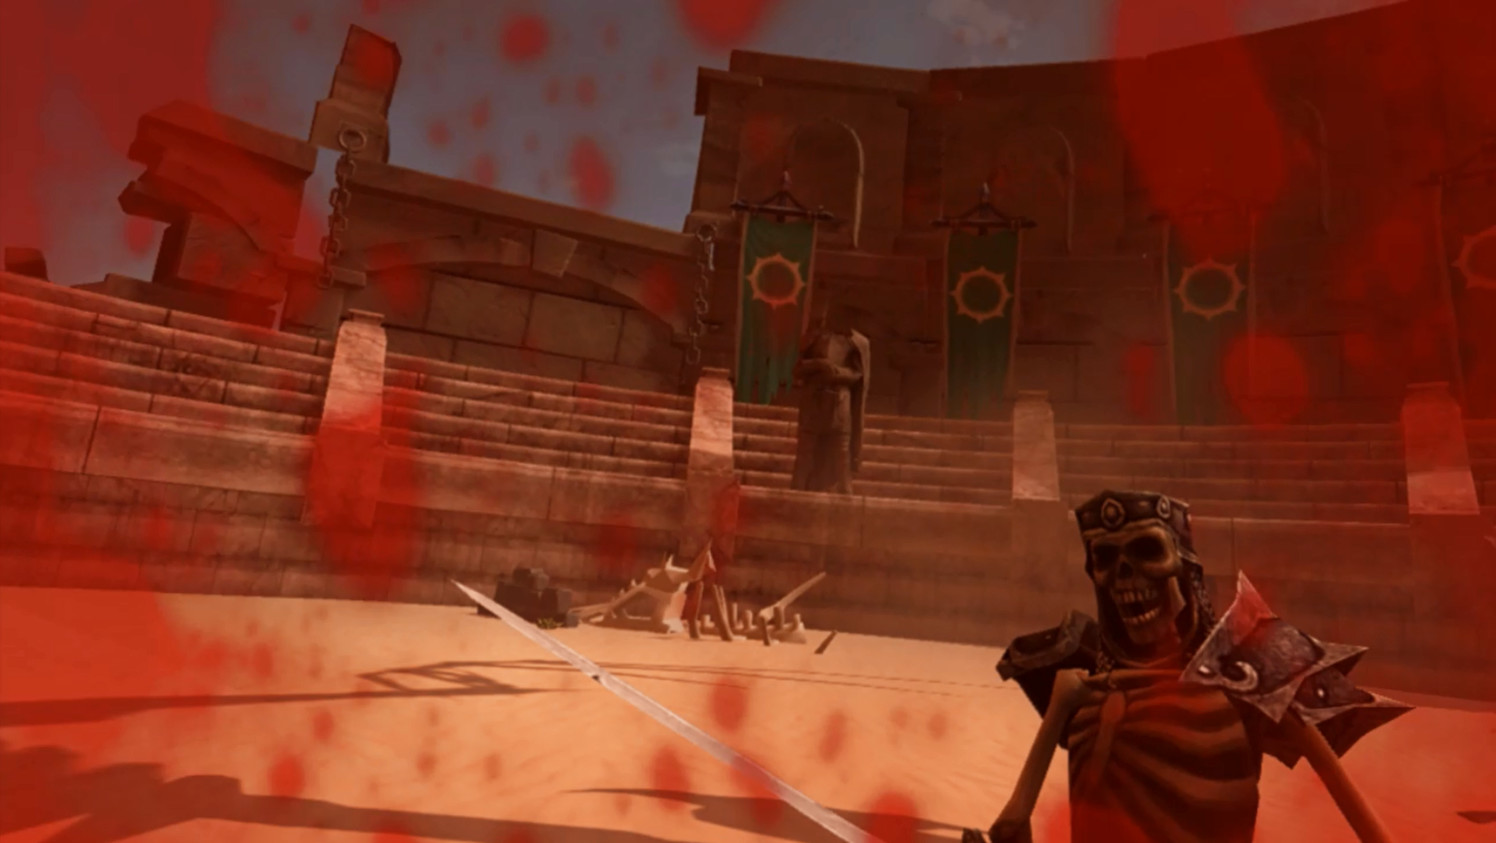 Arena: Blood on the Sand VR Steam CD Key, $5.12